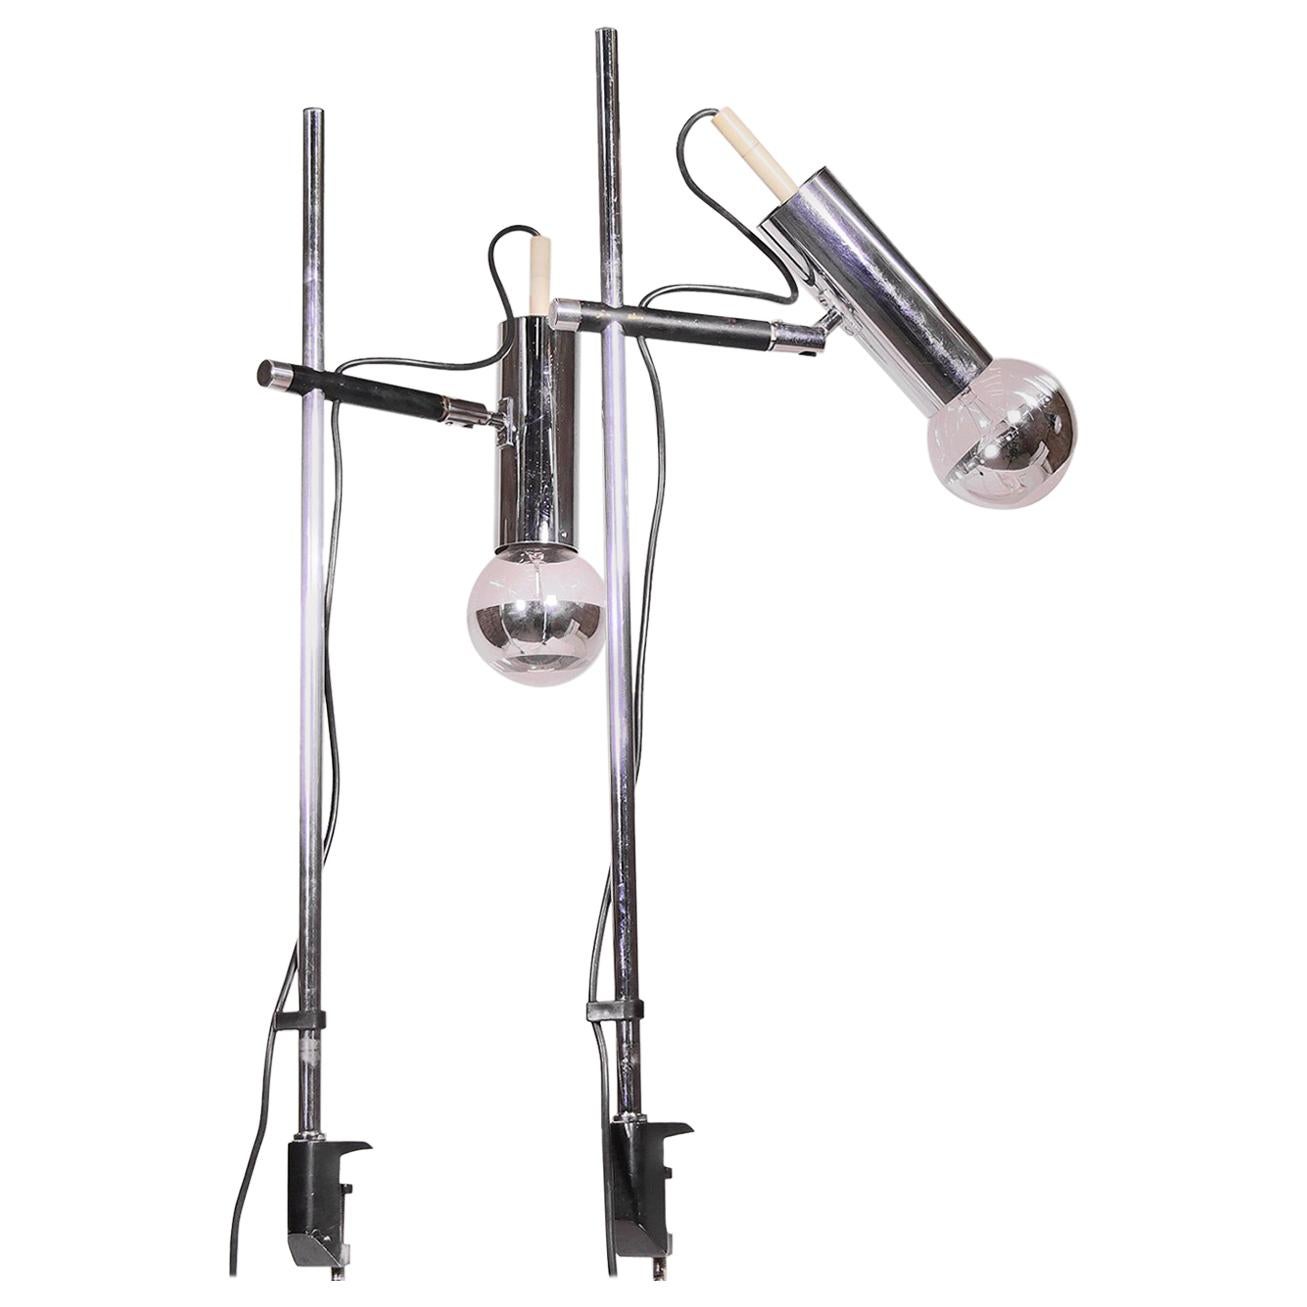 Elegant pair of adjustable clamp desk lamps made and marked by Staff Leuchten in the 1960s in Germany. 

Measures: height 29.5“ in. (75 cm), height from the edge of the table 27“ in. (69 cm). 
Lighting: takes one large Edison bulb per lamp